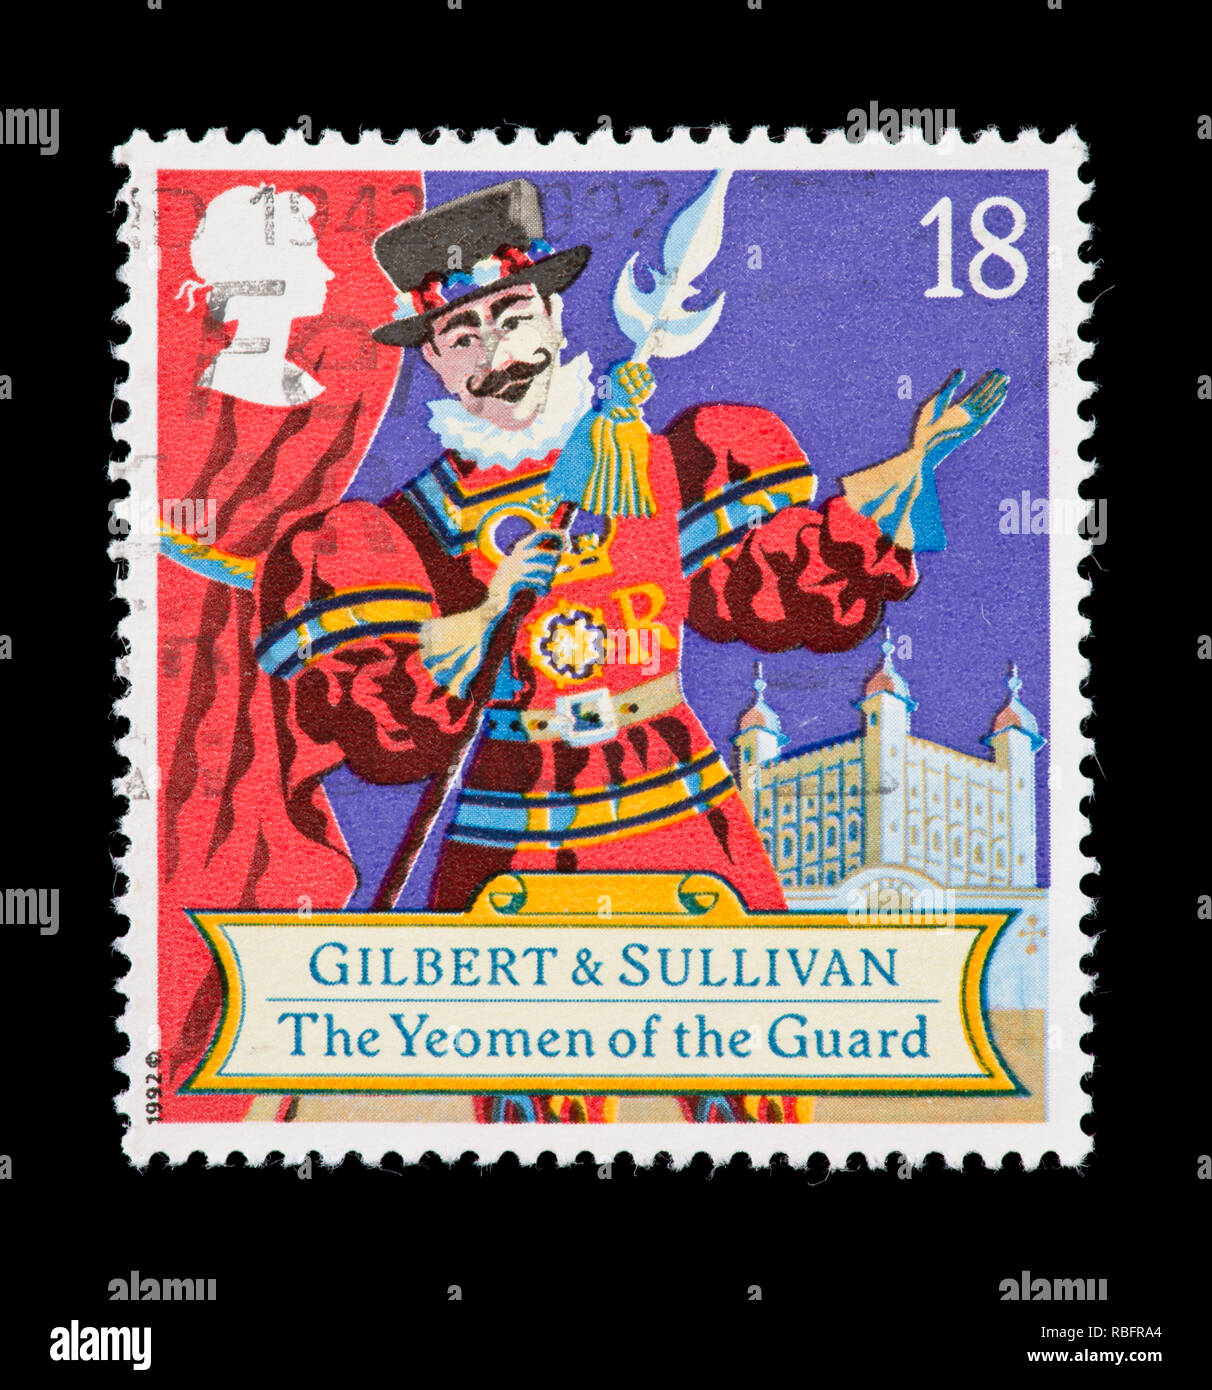 Postage stamp from Great Britain depicting the Yeoman of the Guard, scene from Gilbert and Sullivan comic opera. Stock Photo